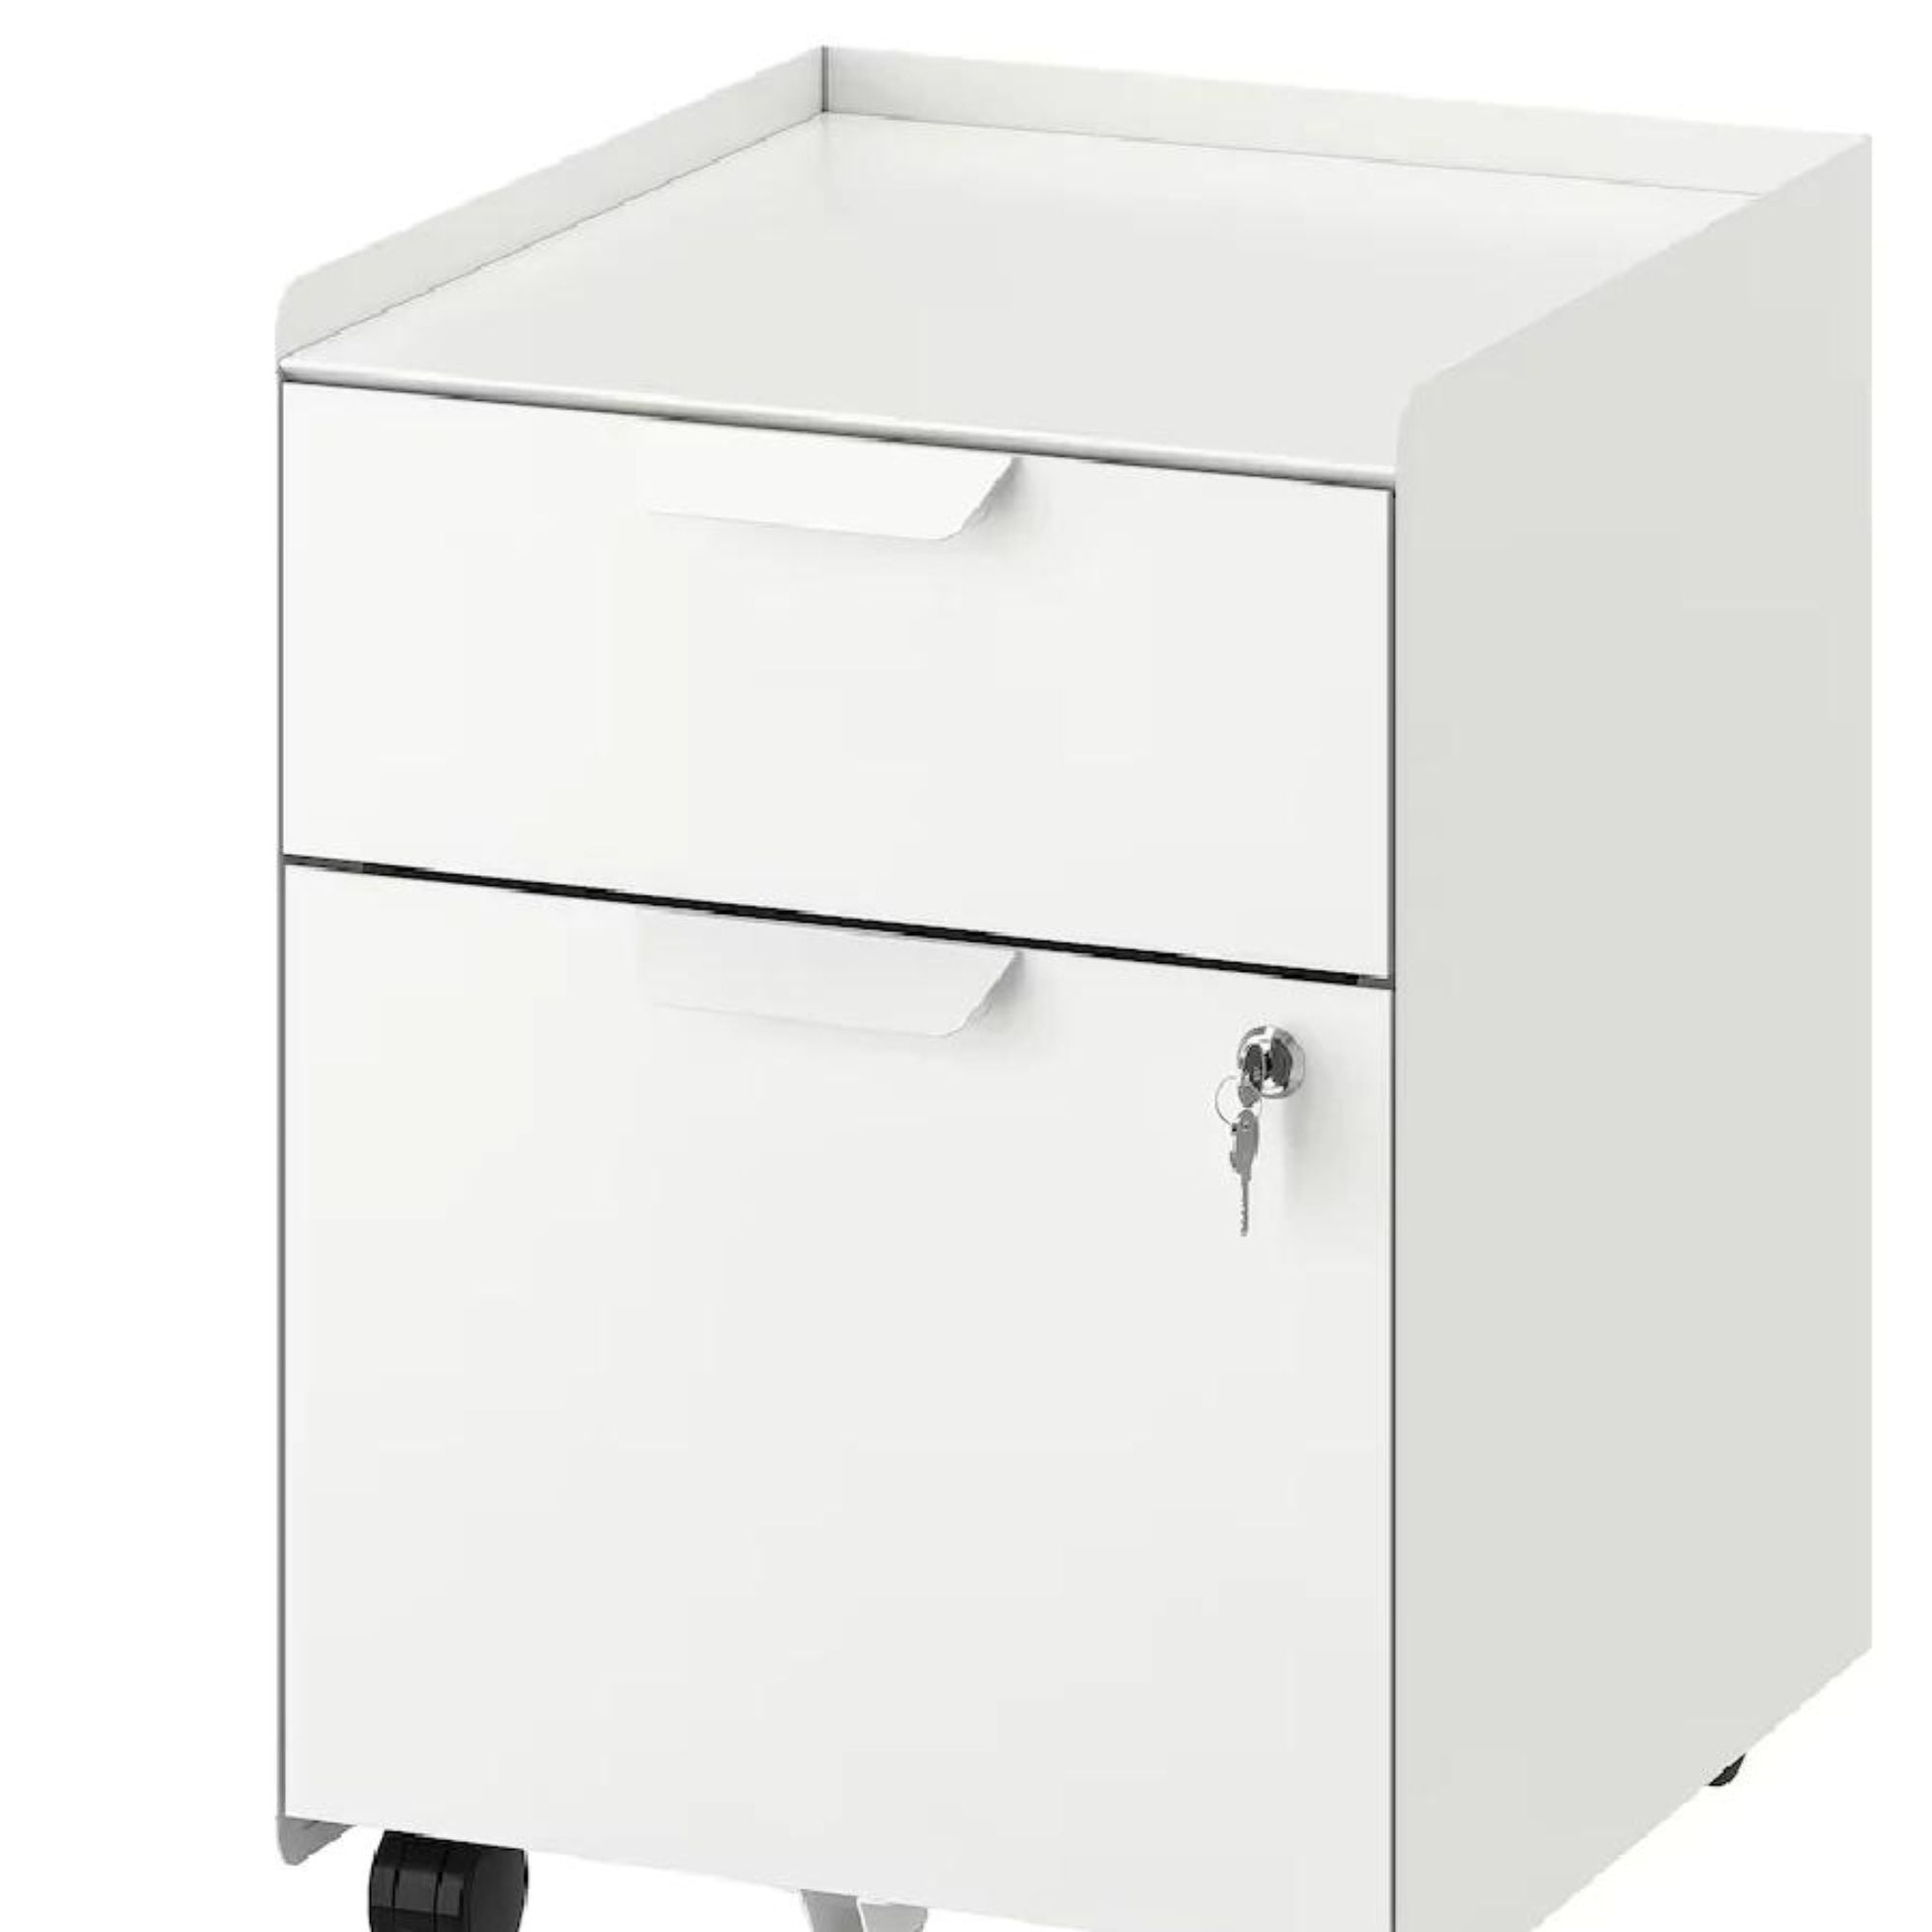 TROTTEN Drawer unit w 2 drawers on casters, white